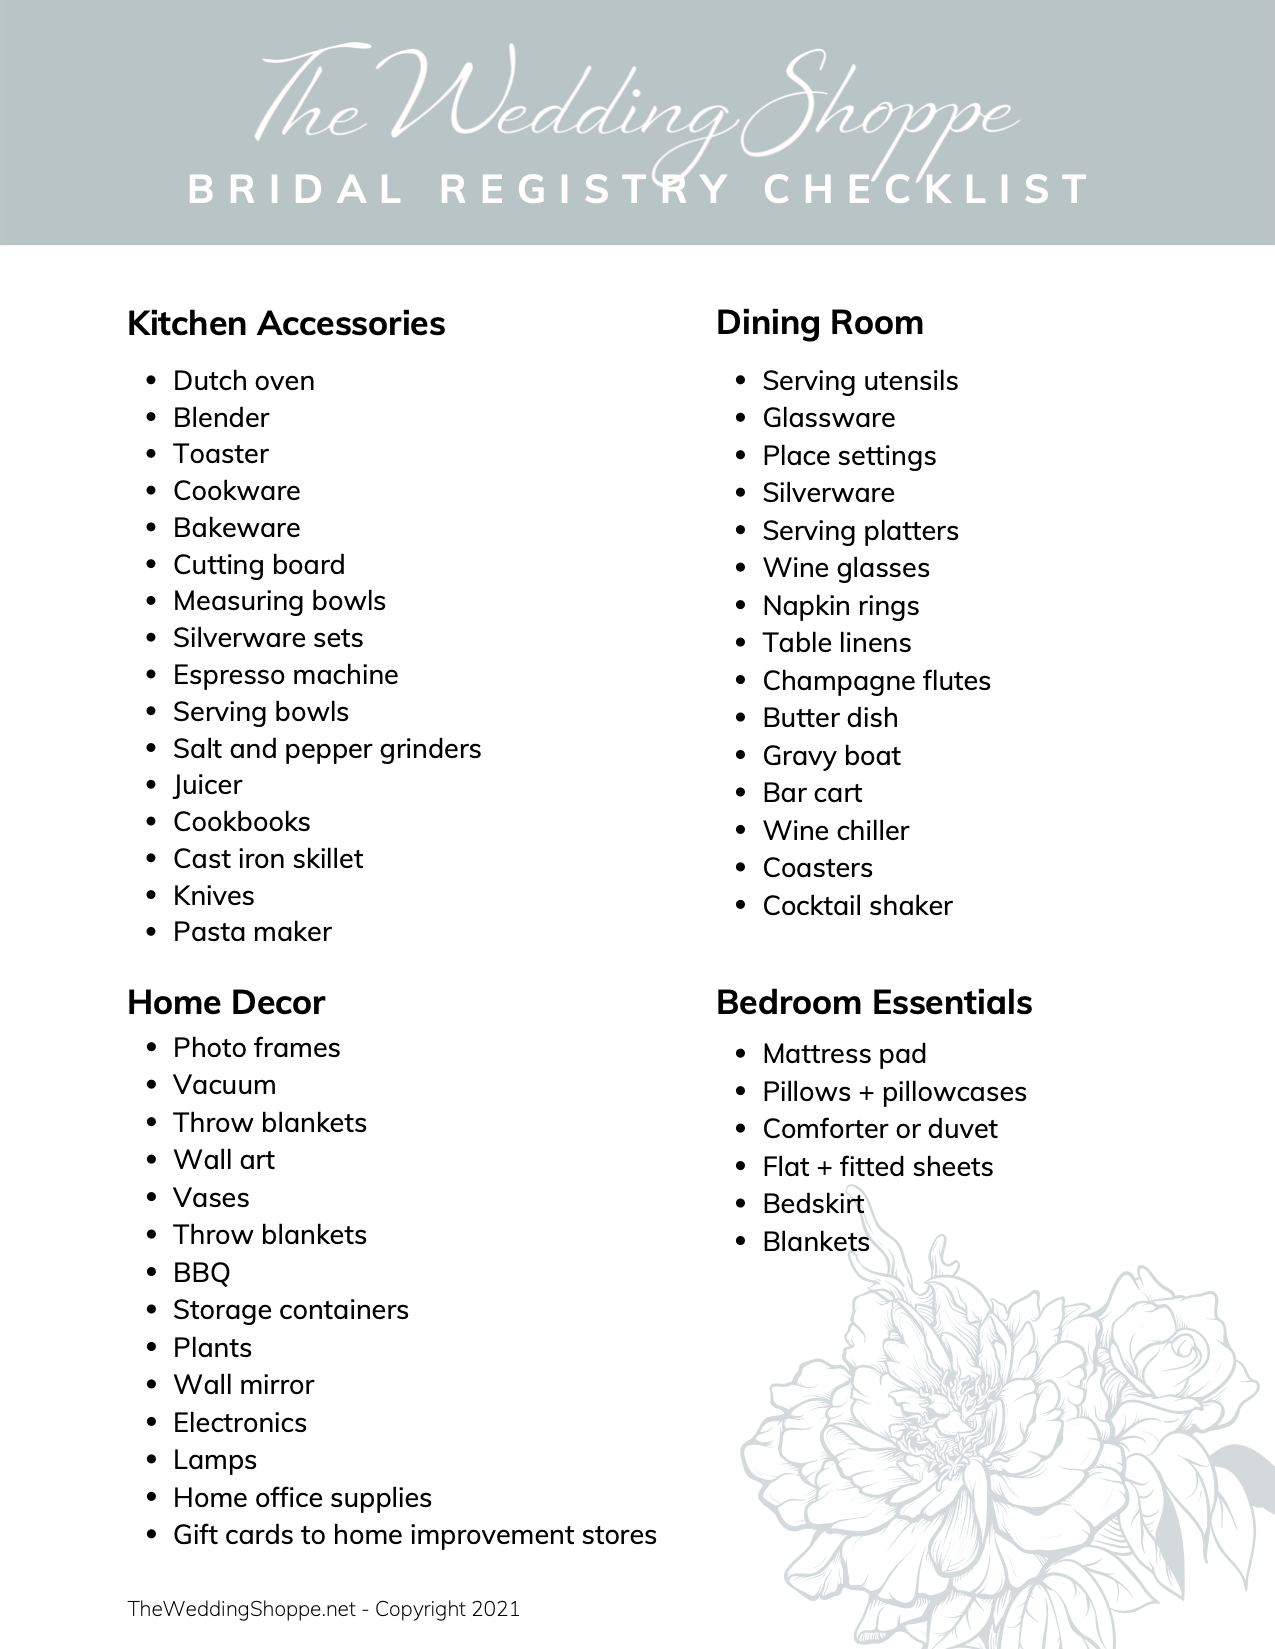 The Ultimate Wedding Registry Checklist for Brides The Wedding Shoppe